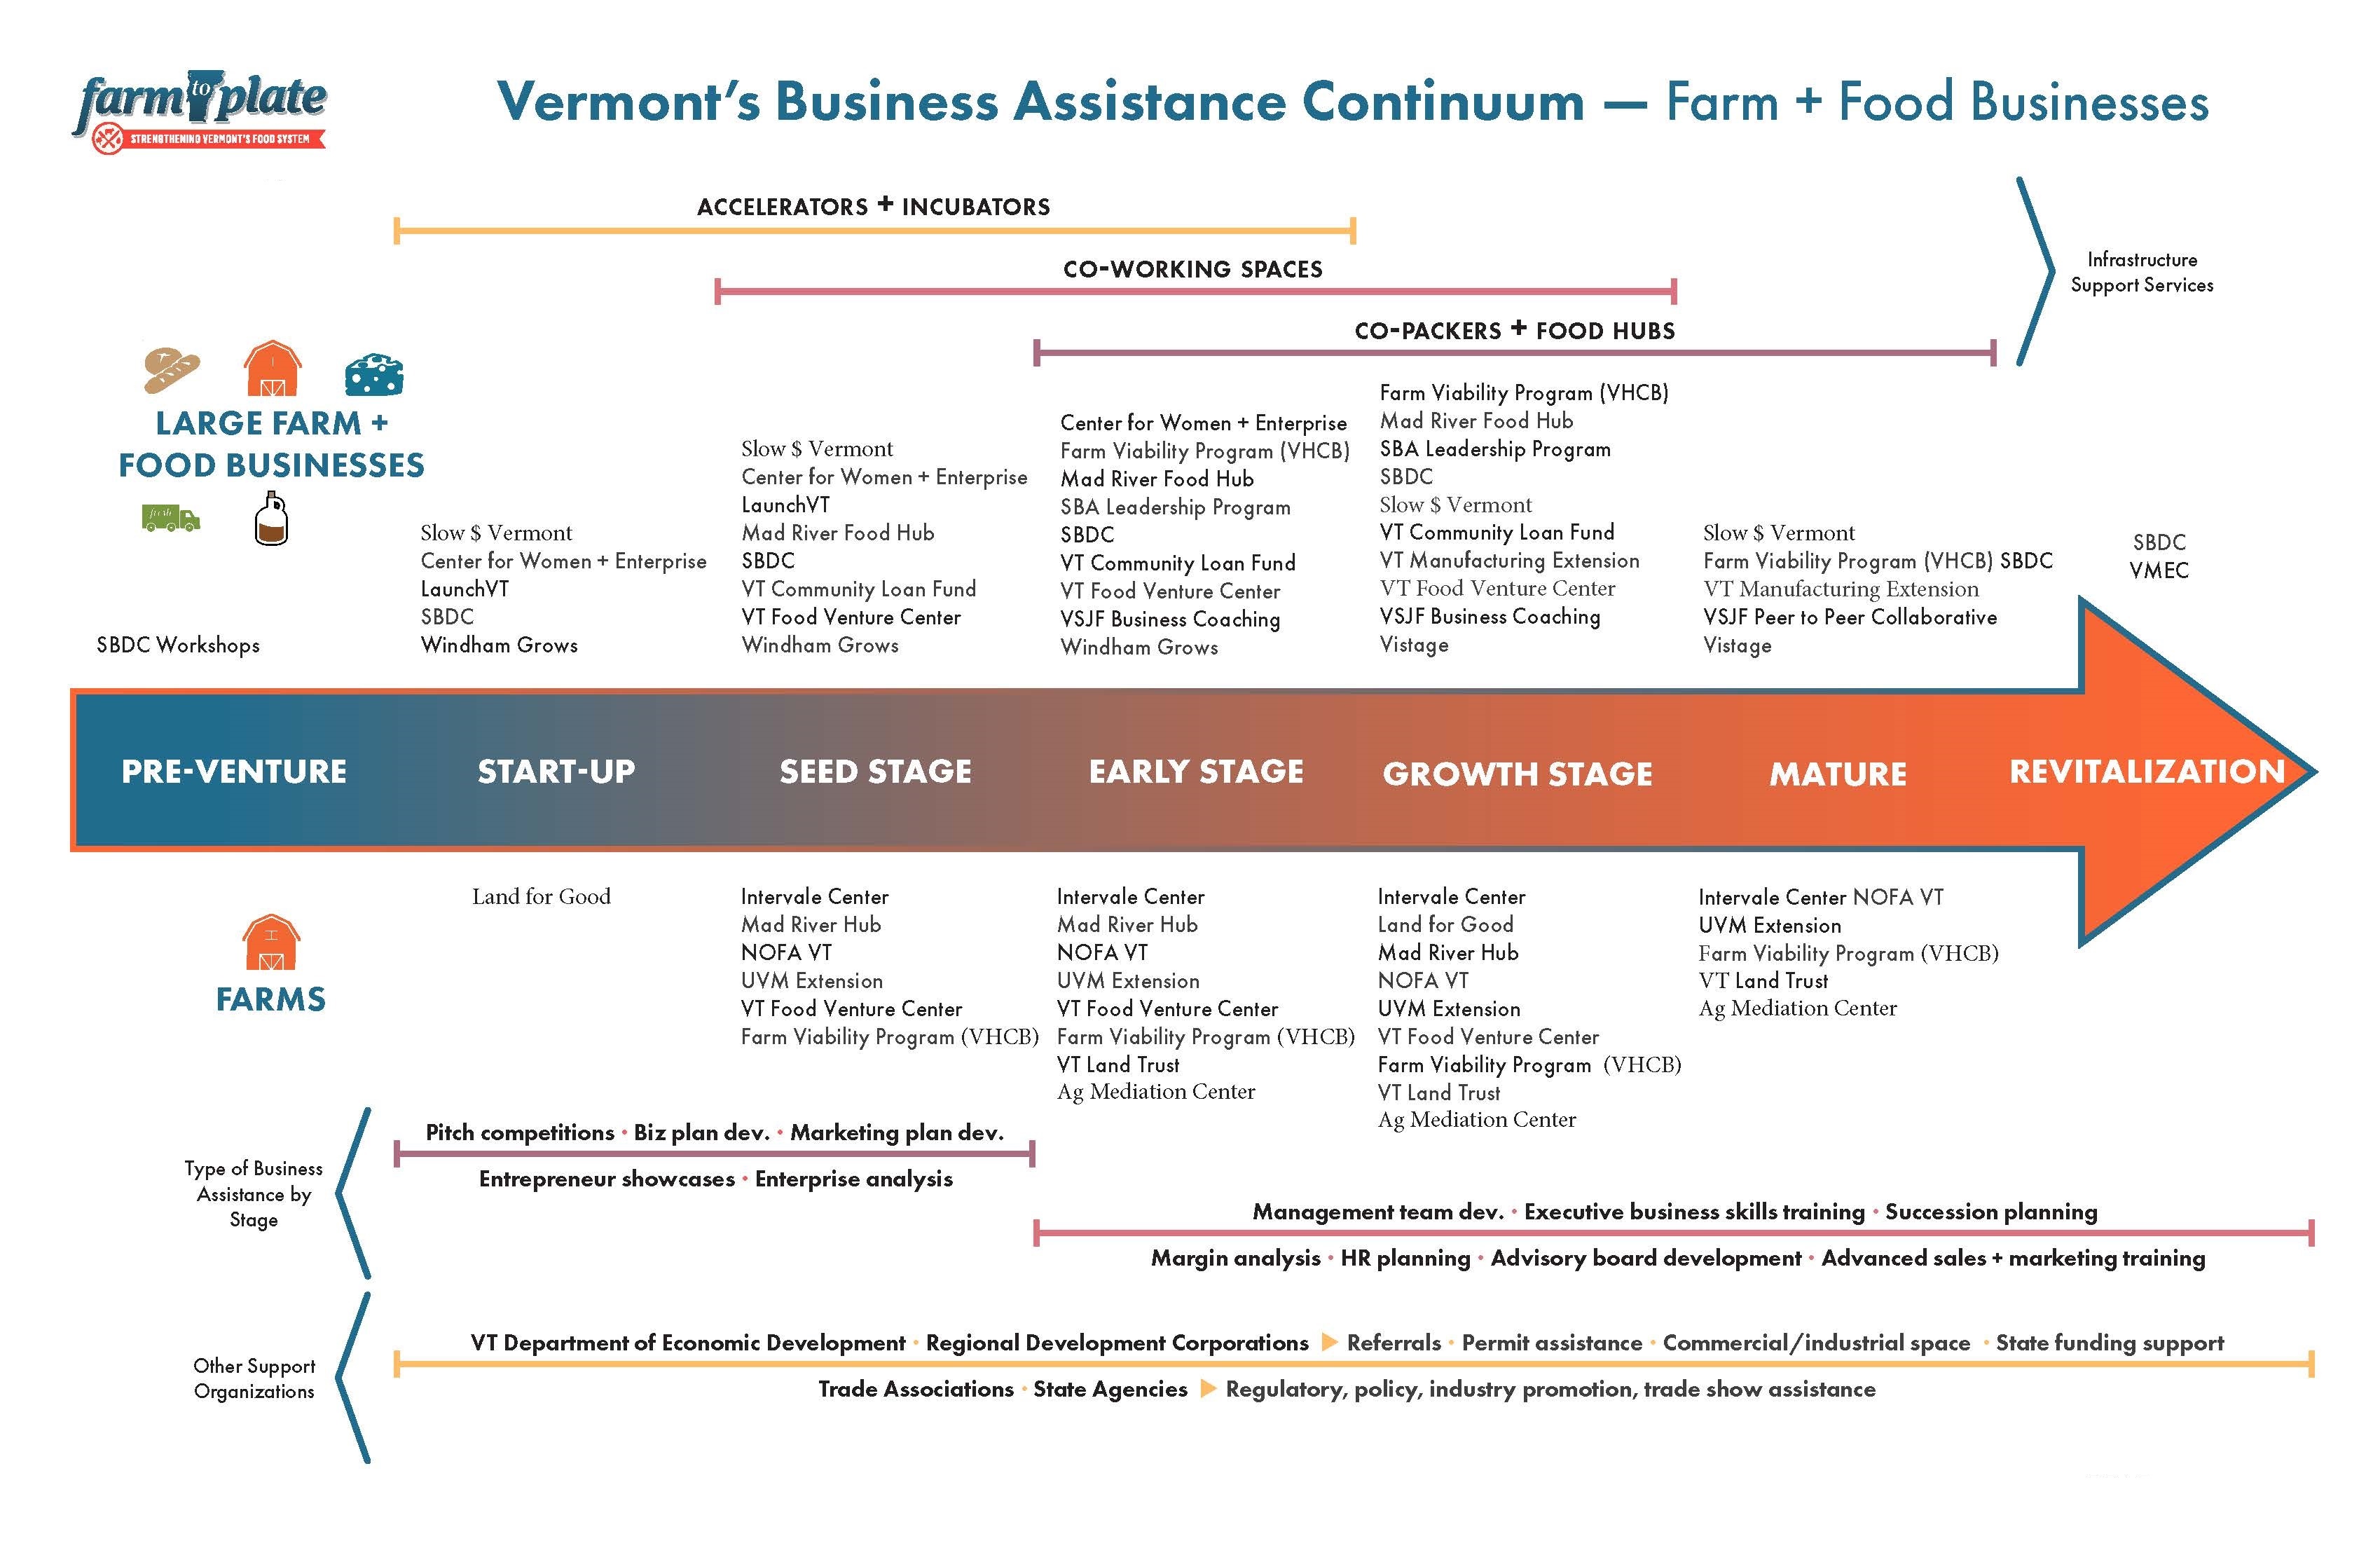 Image of Farm to Plate Business Assistance Continuum